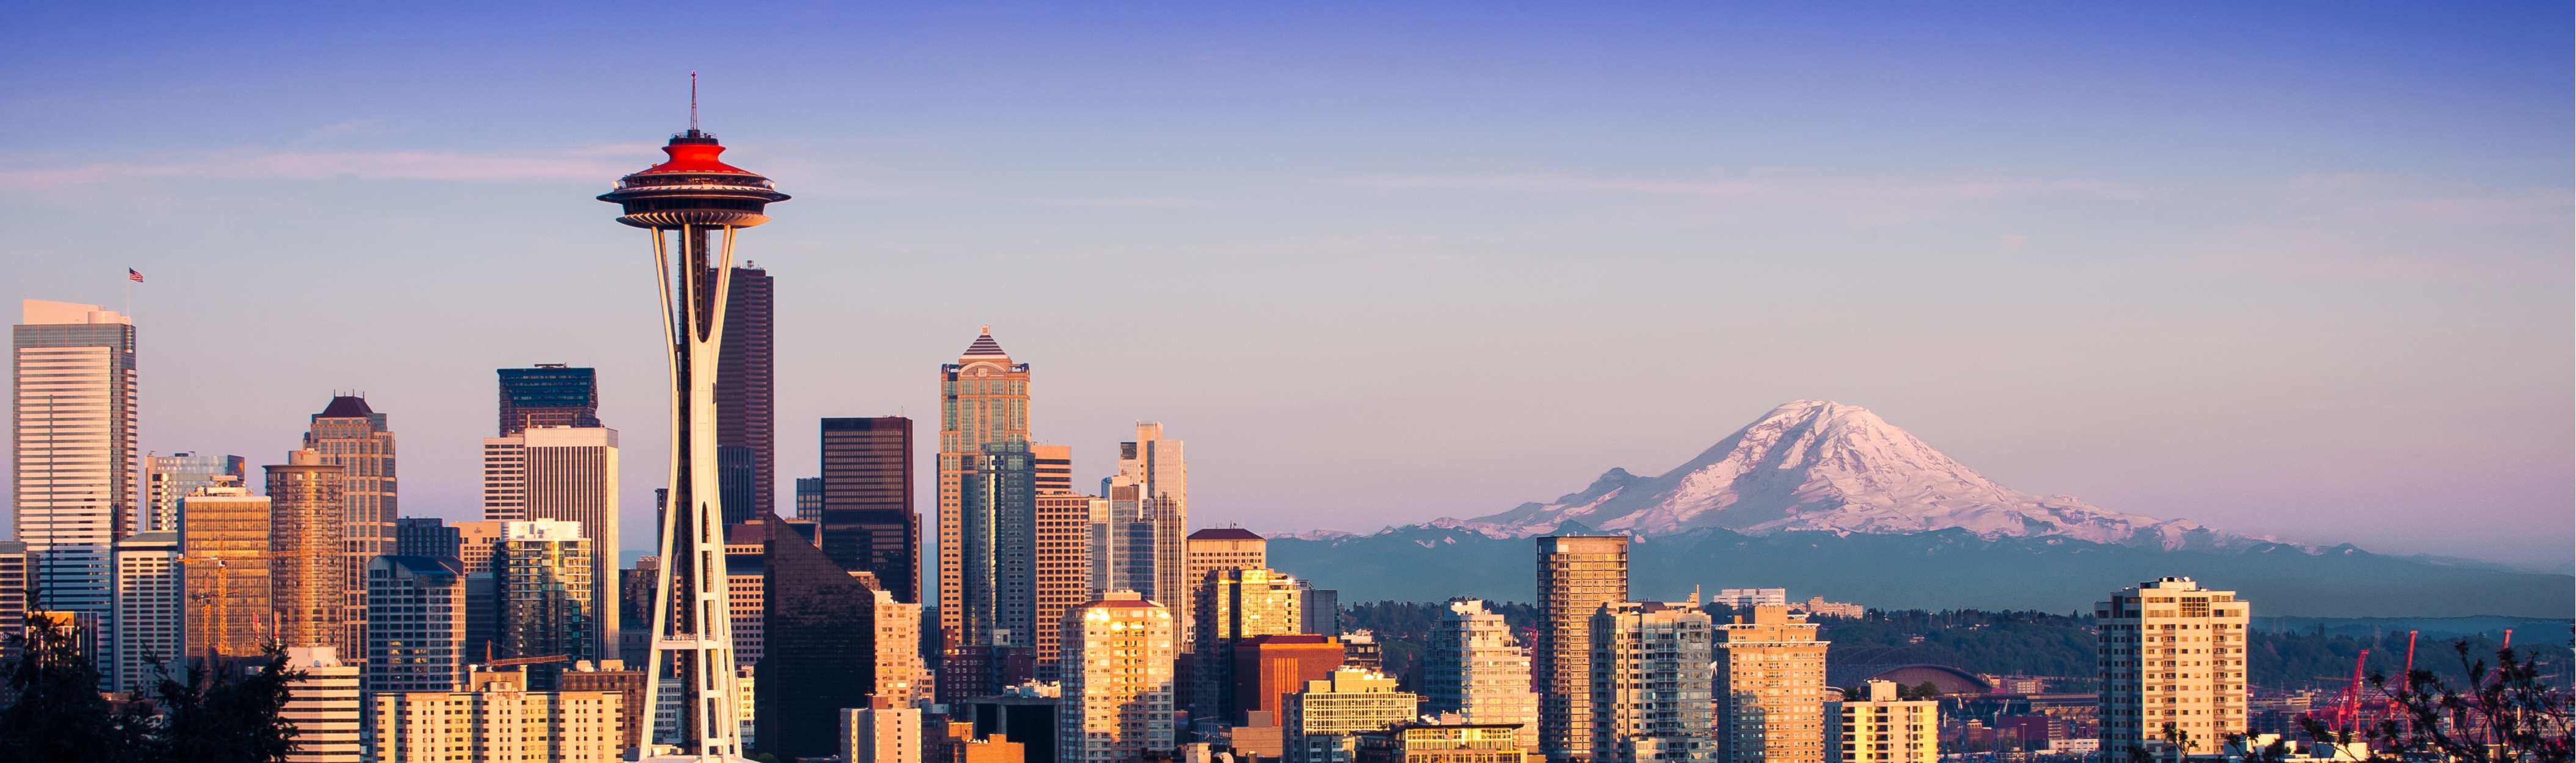 Seattle-skyline-kerry-park-4219x1250.png